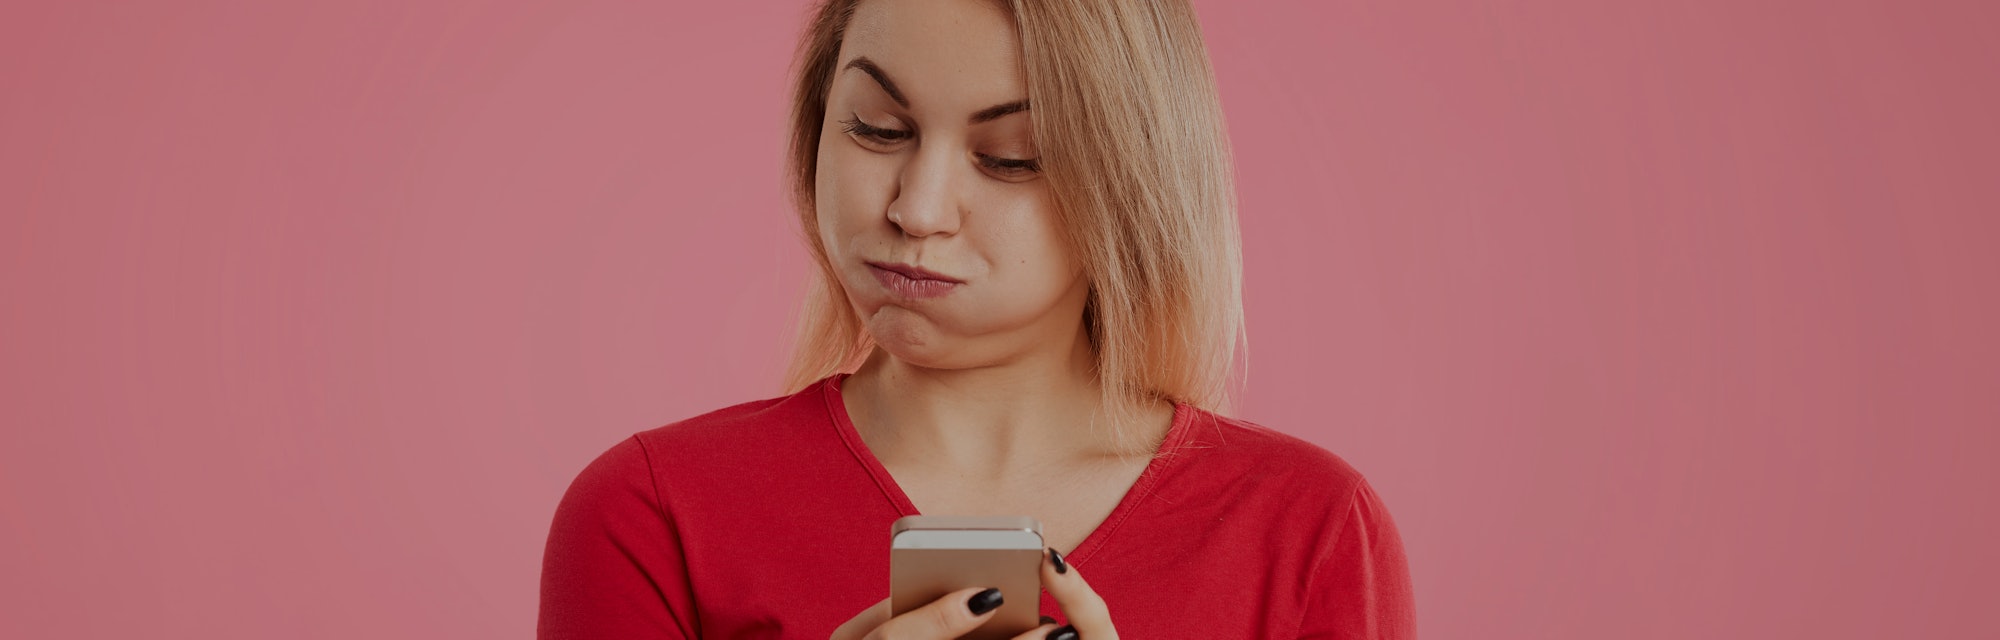 A woman looks frustrated and confused at her phone.